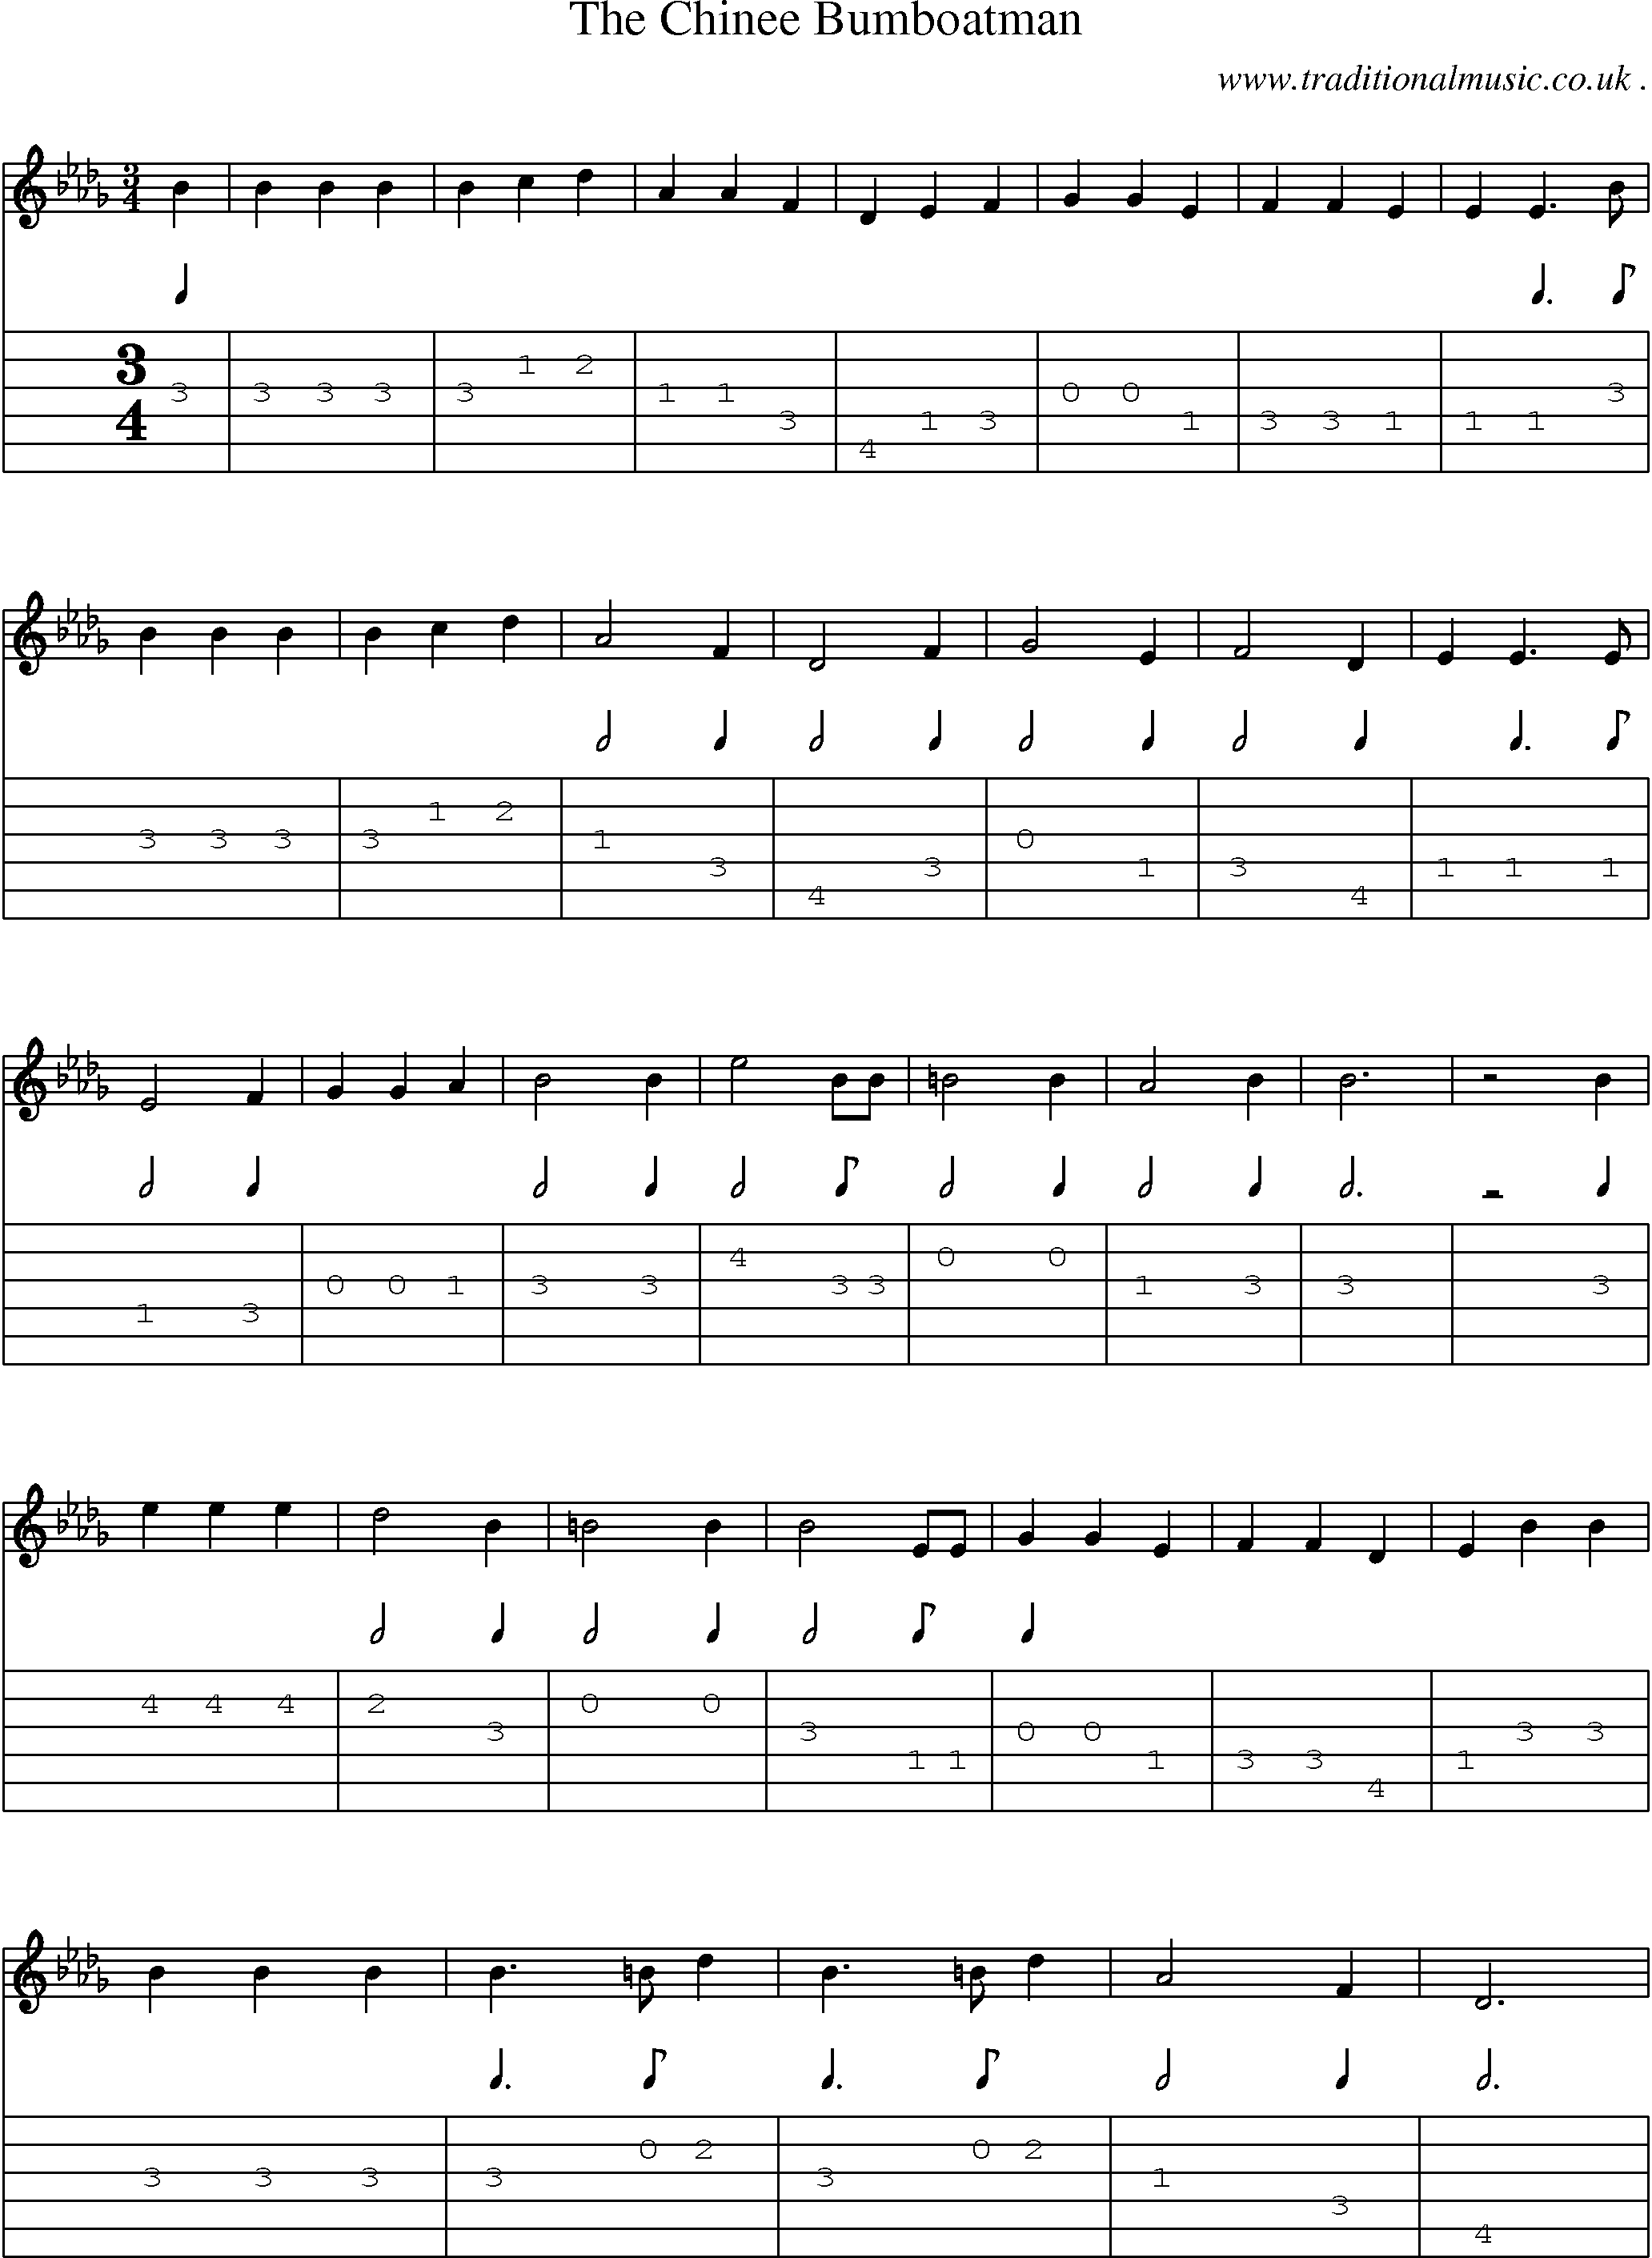 Sheet-Music and Guitar Tabs for The Chinee Bumboatman